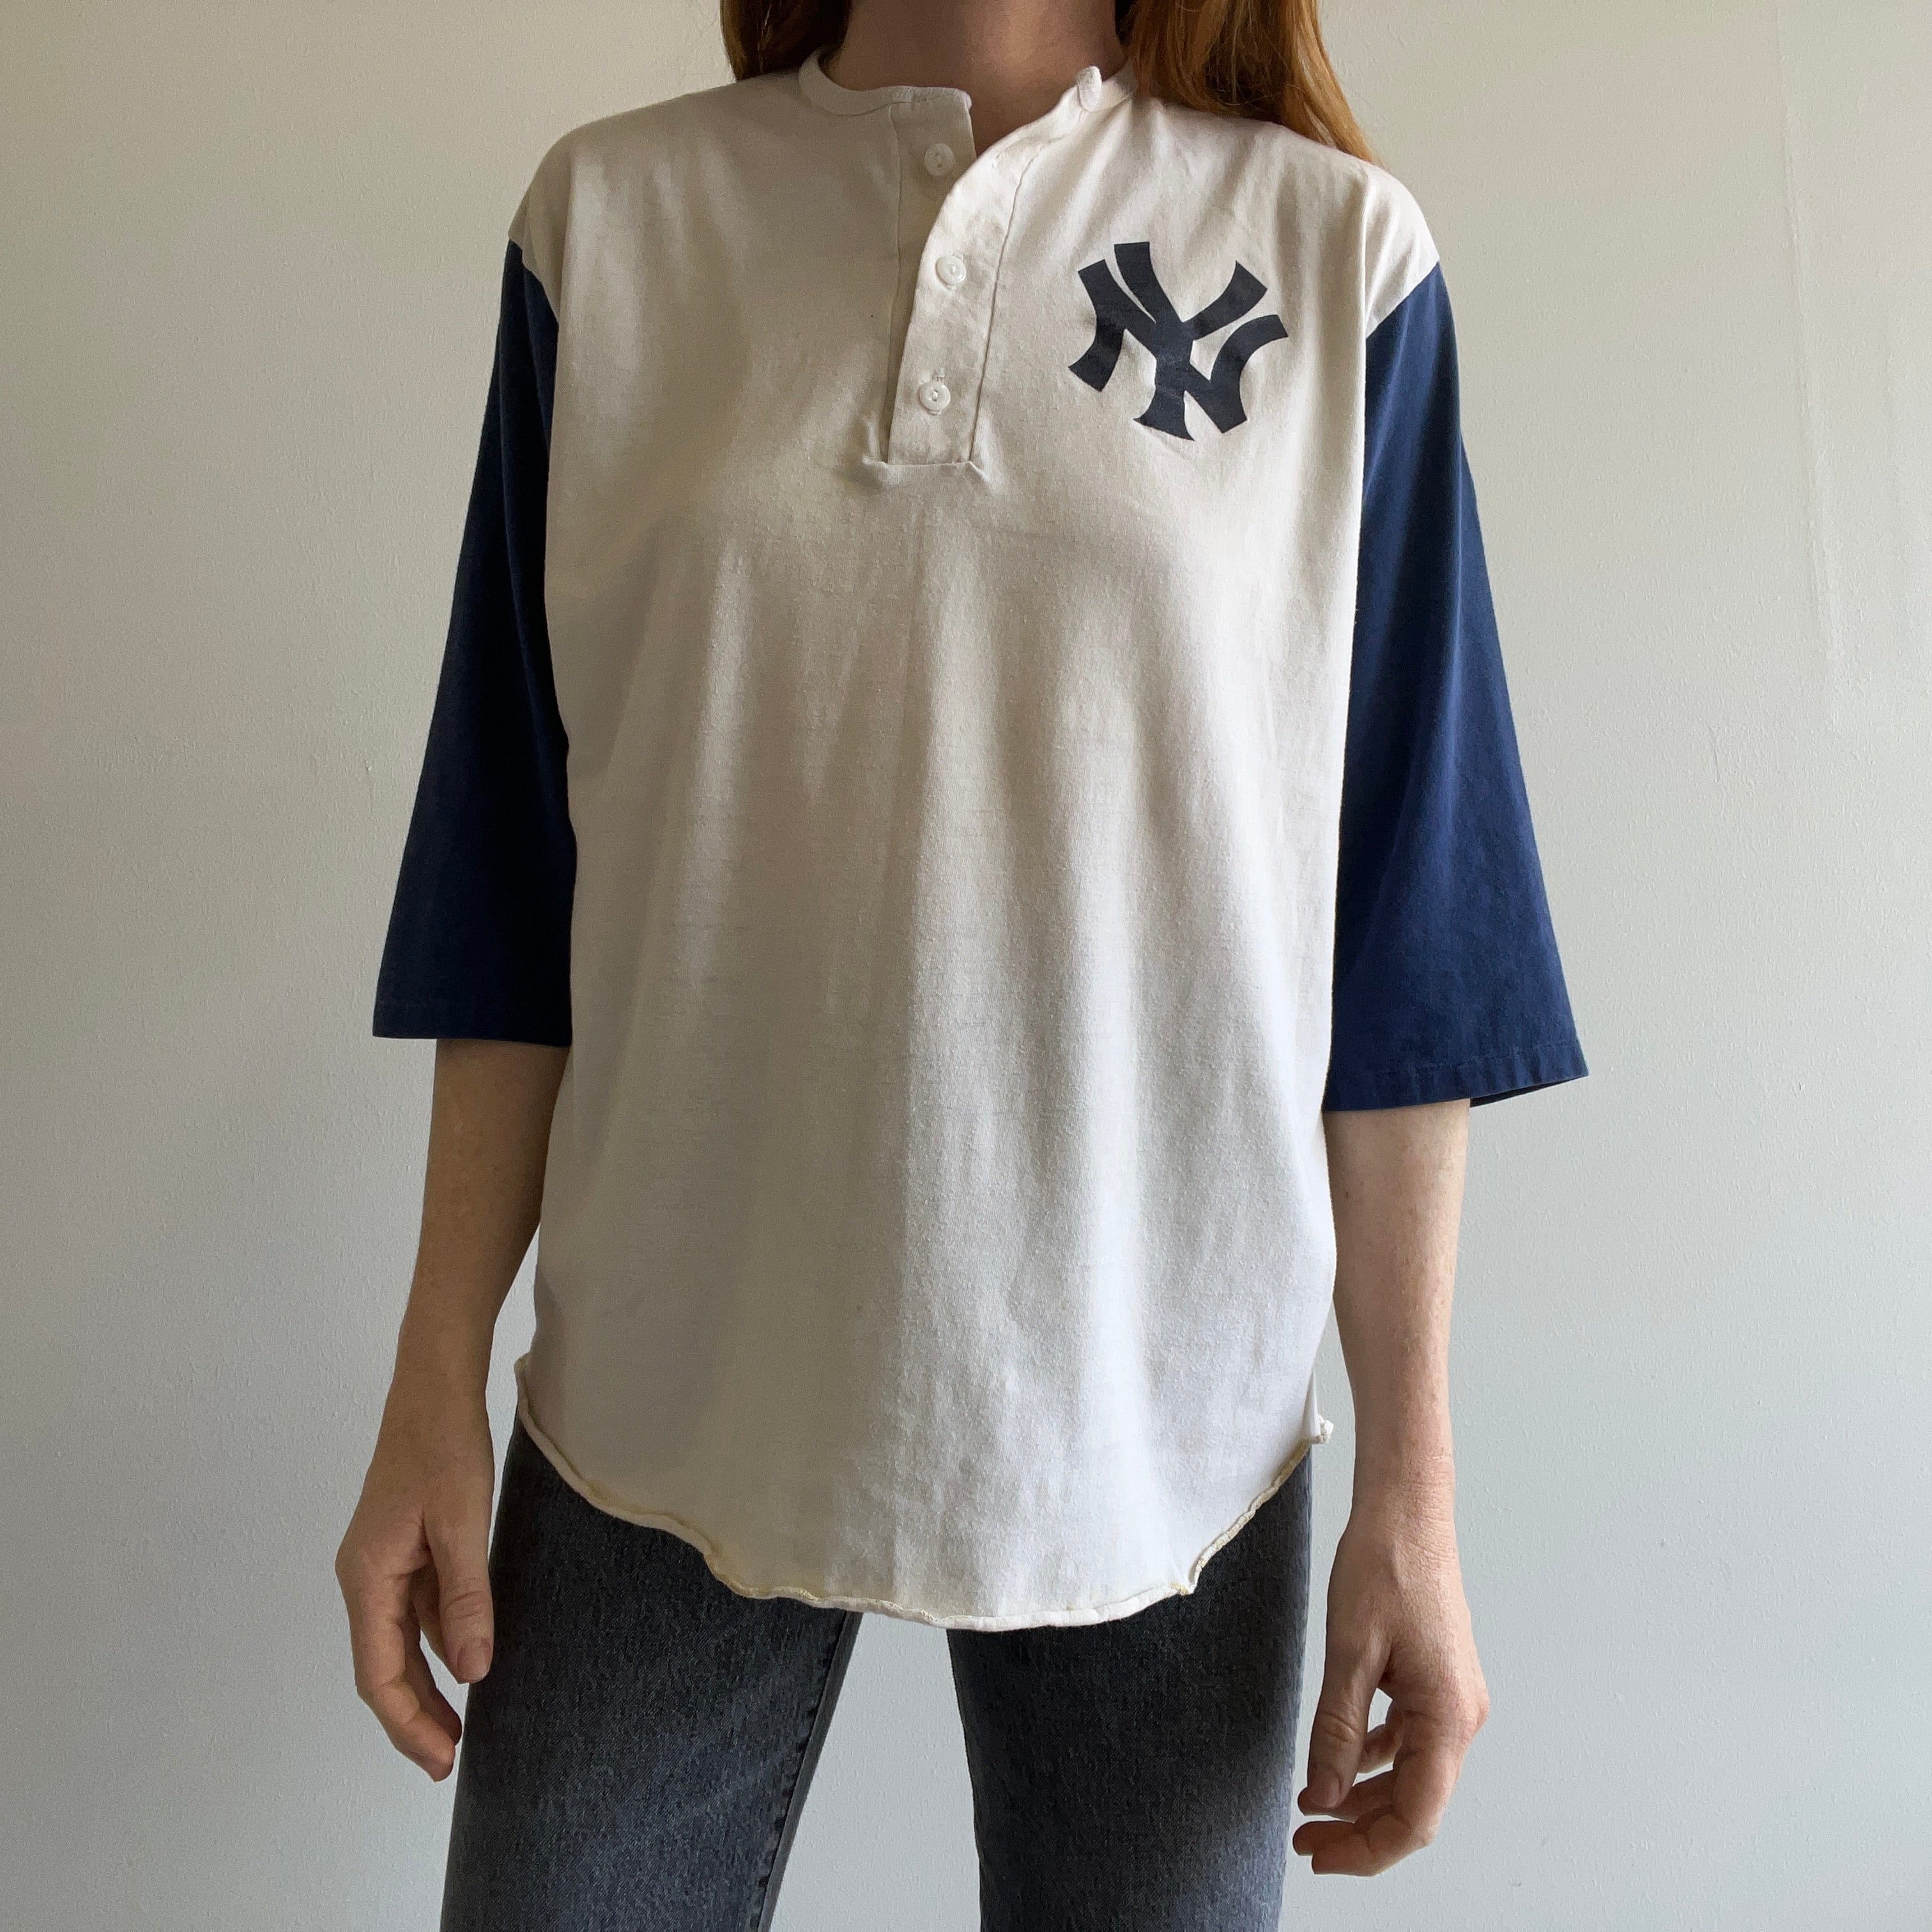 Next Level Apparel New York Yankees T-Shirts for Men